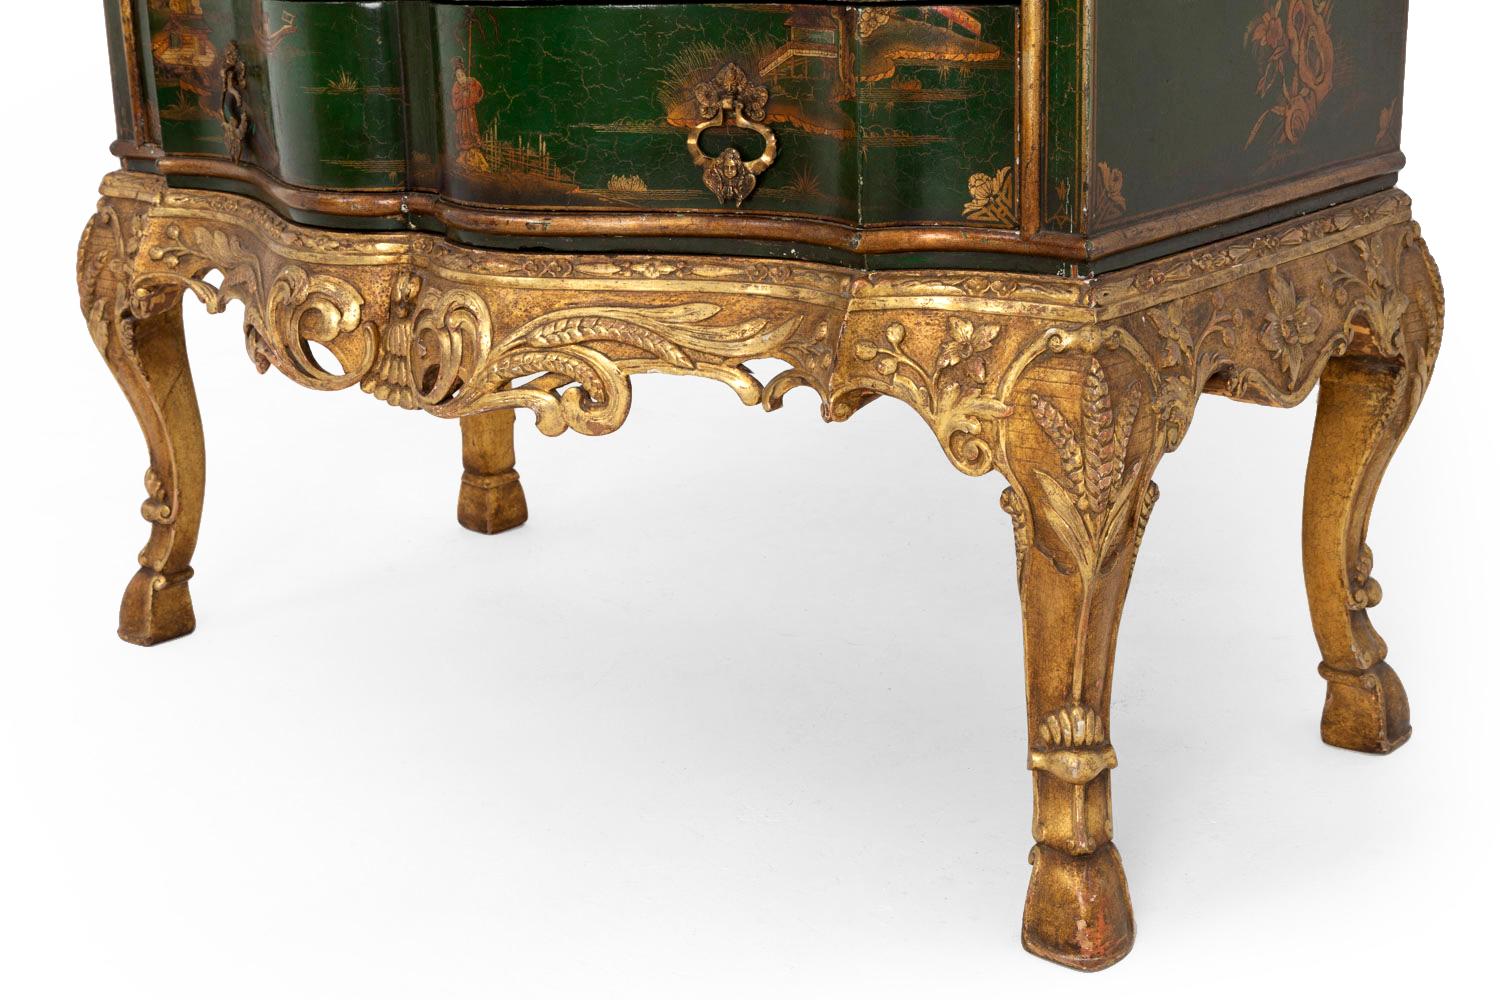 Serpentine Commode in Green Lacquered Wood, Chinese Decoration, 1950s (Europäisch)